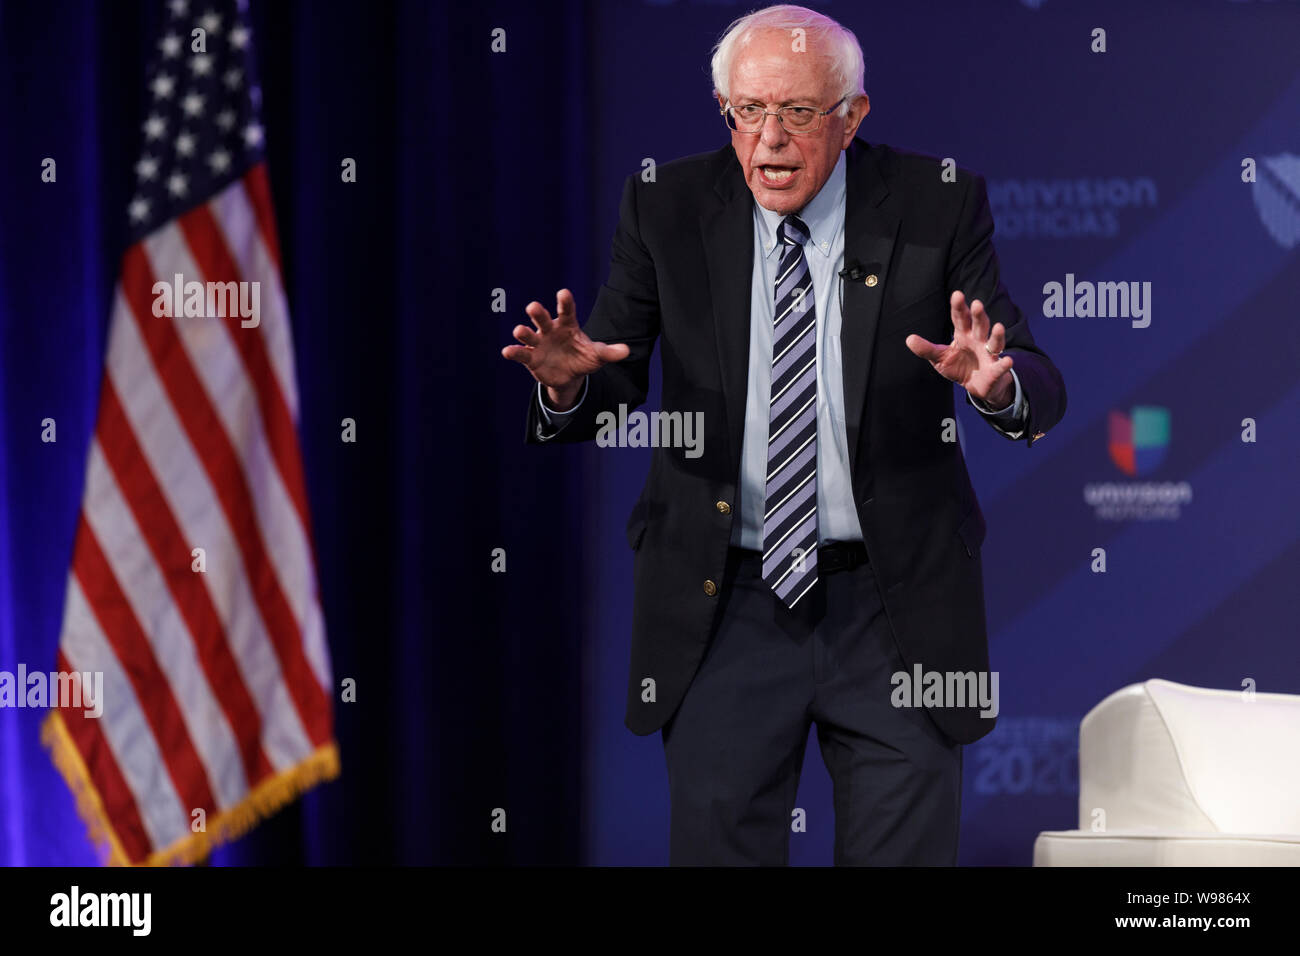 Senator Bernie Sanders, an independent from Vermont and 2020 presidential candidate, speaks on stage Stock Photo